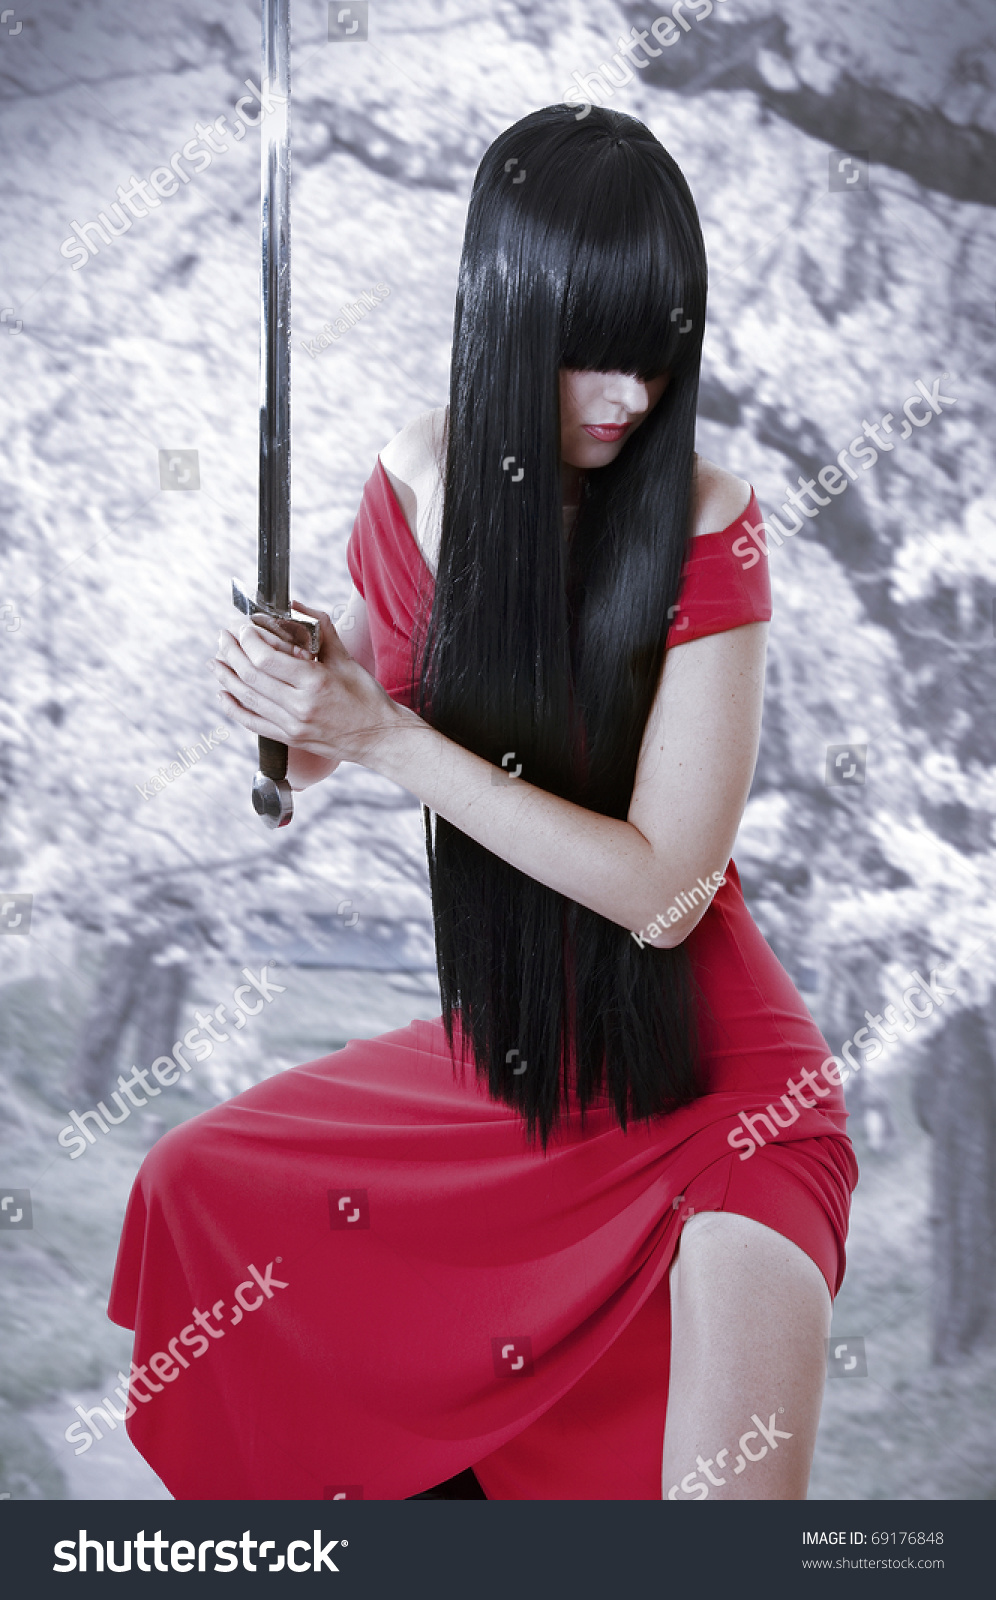 Dangerous Sexual Mystery Asian Girl Anime Style Woman With Long Black Hair With Sword And Red